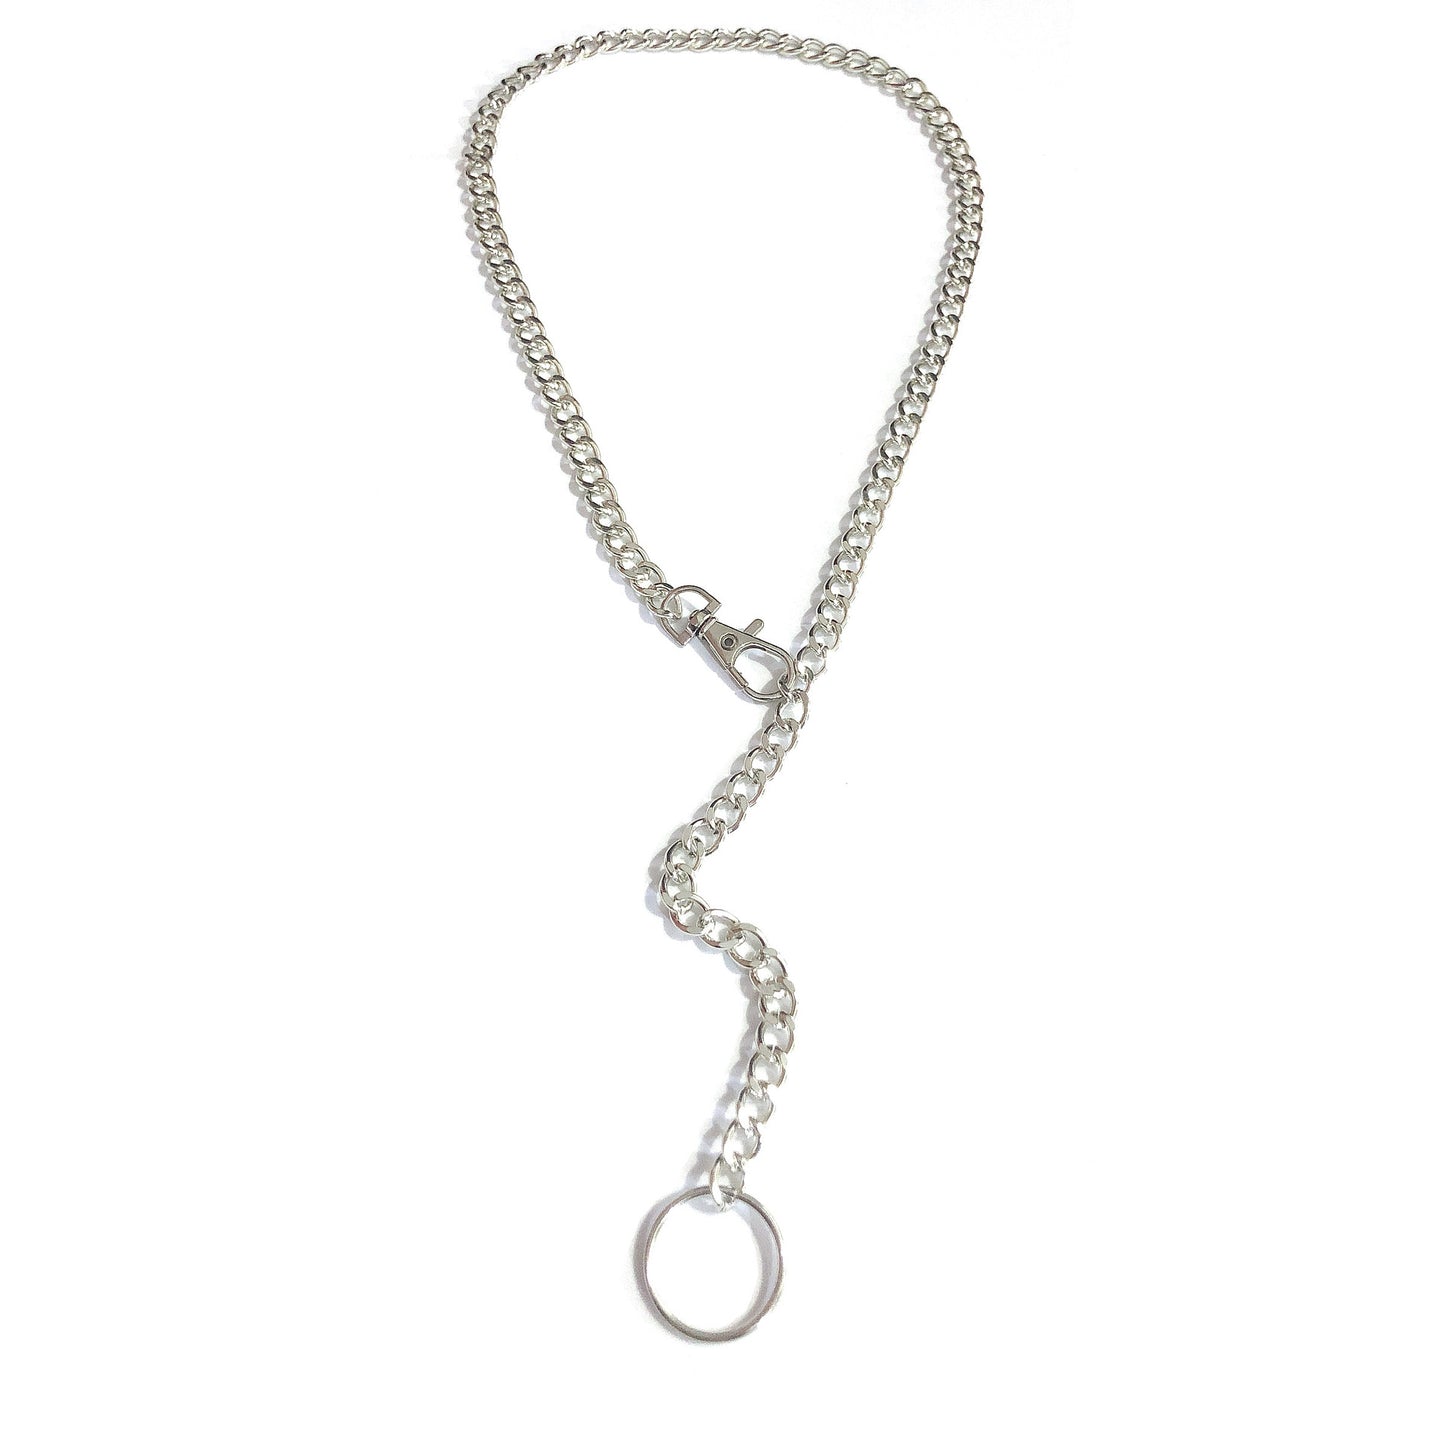 CHAIN CHOKER NECKLACE